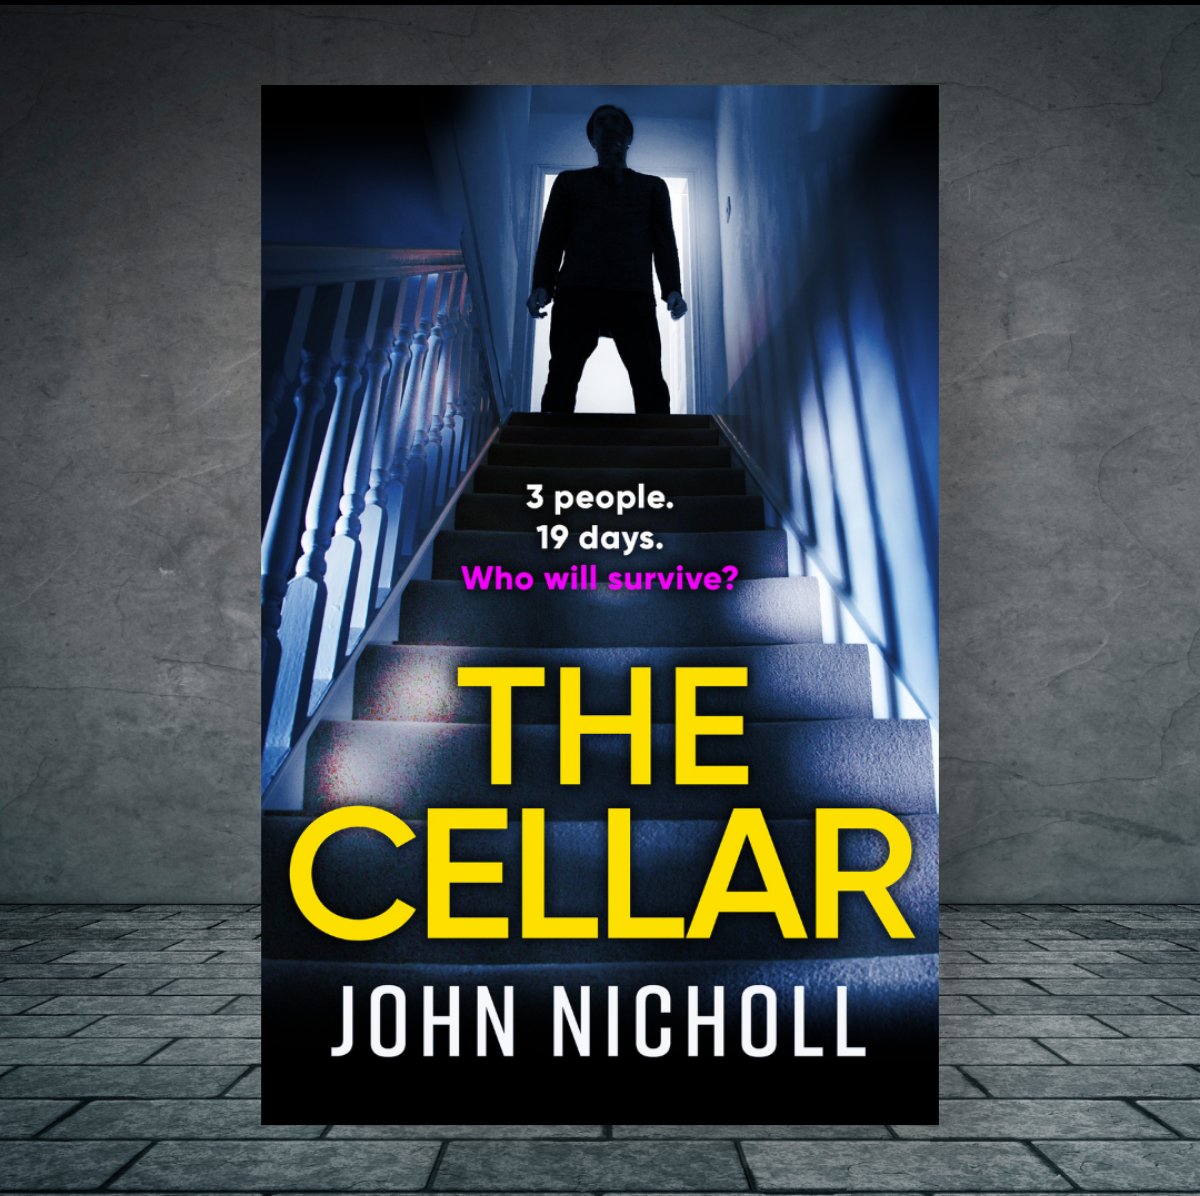 John Nicholl is my go-to for scary books. The Cellar intricately plays on the readers fears to create an unforgettable novel.  Told in alternating pov's, the characters feel real and create a sense of uneasiness that permeates deep within the psyche. #TheCellar #JohnNicholl